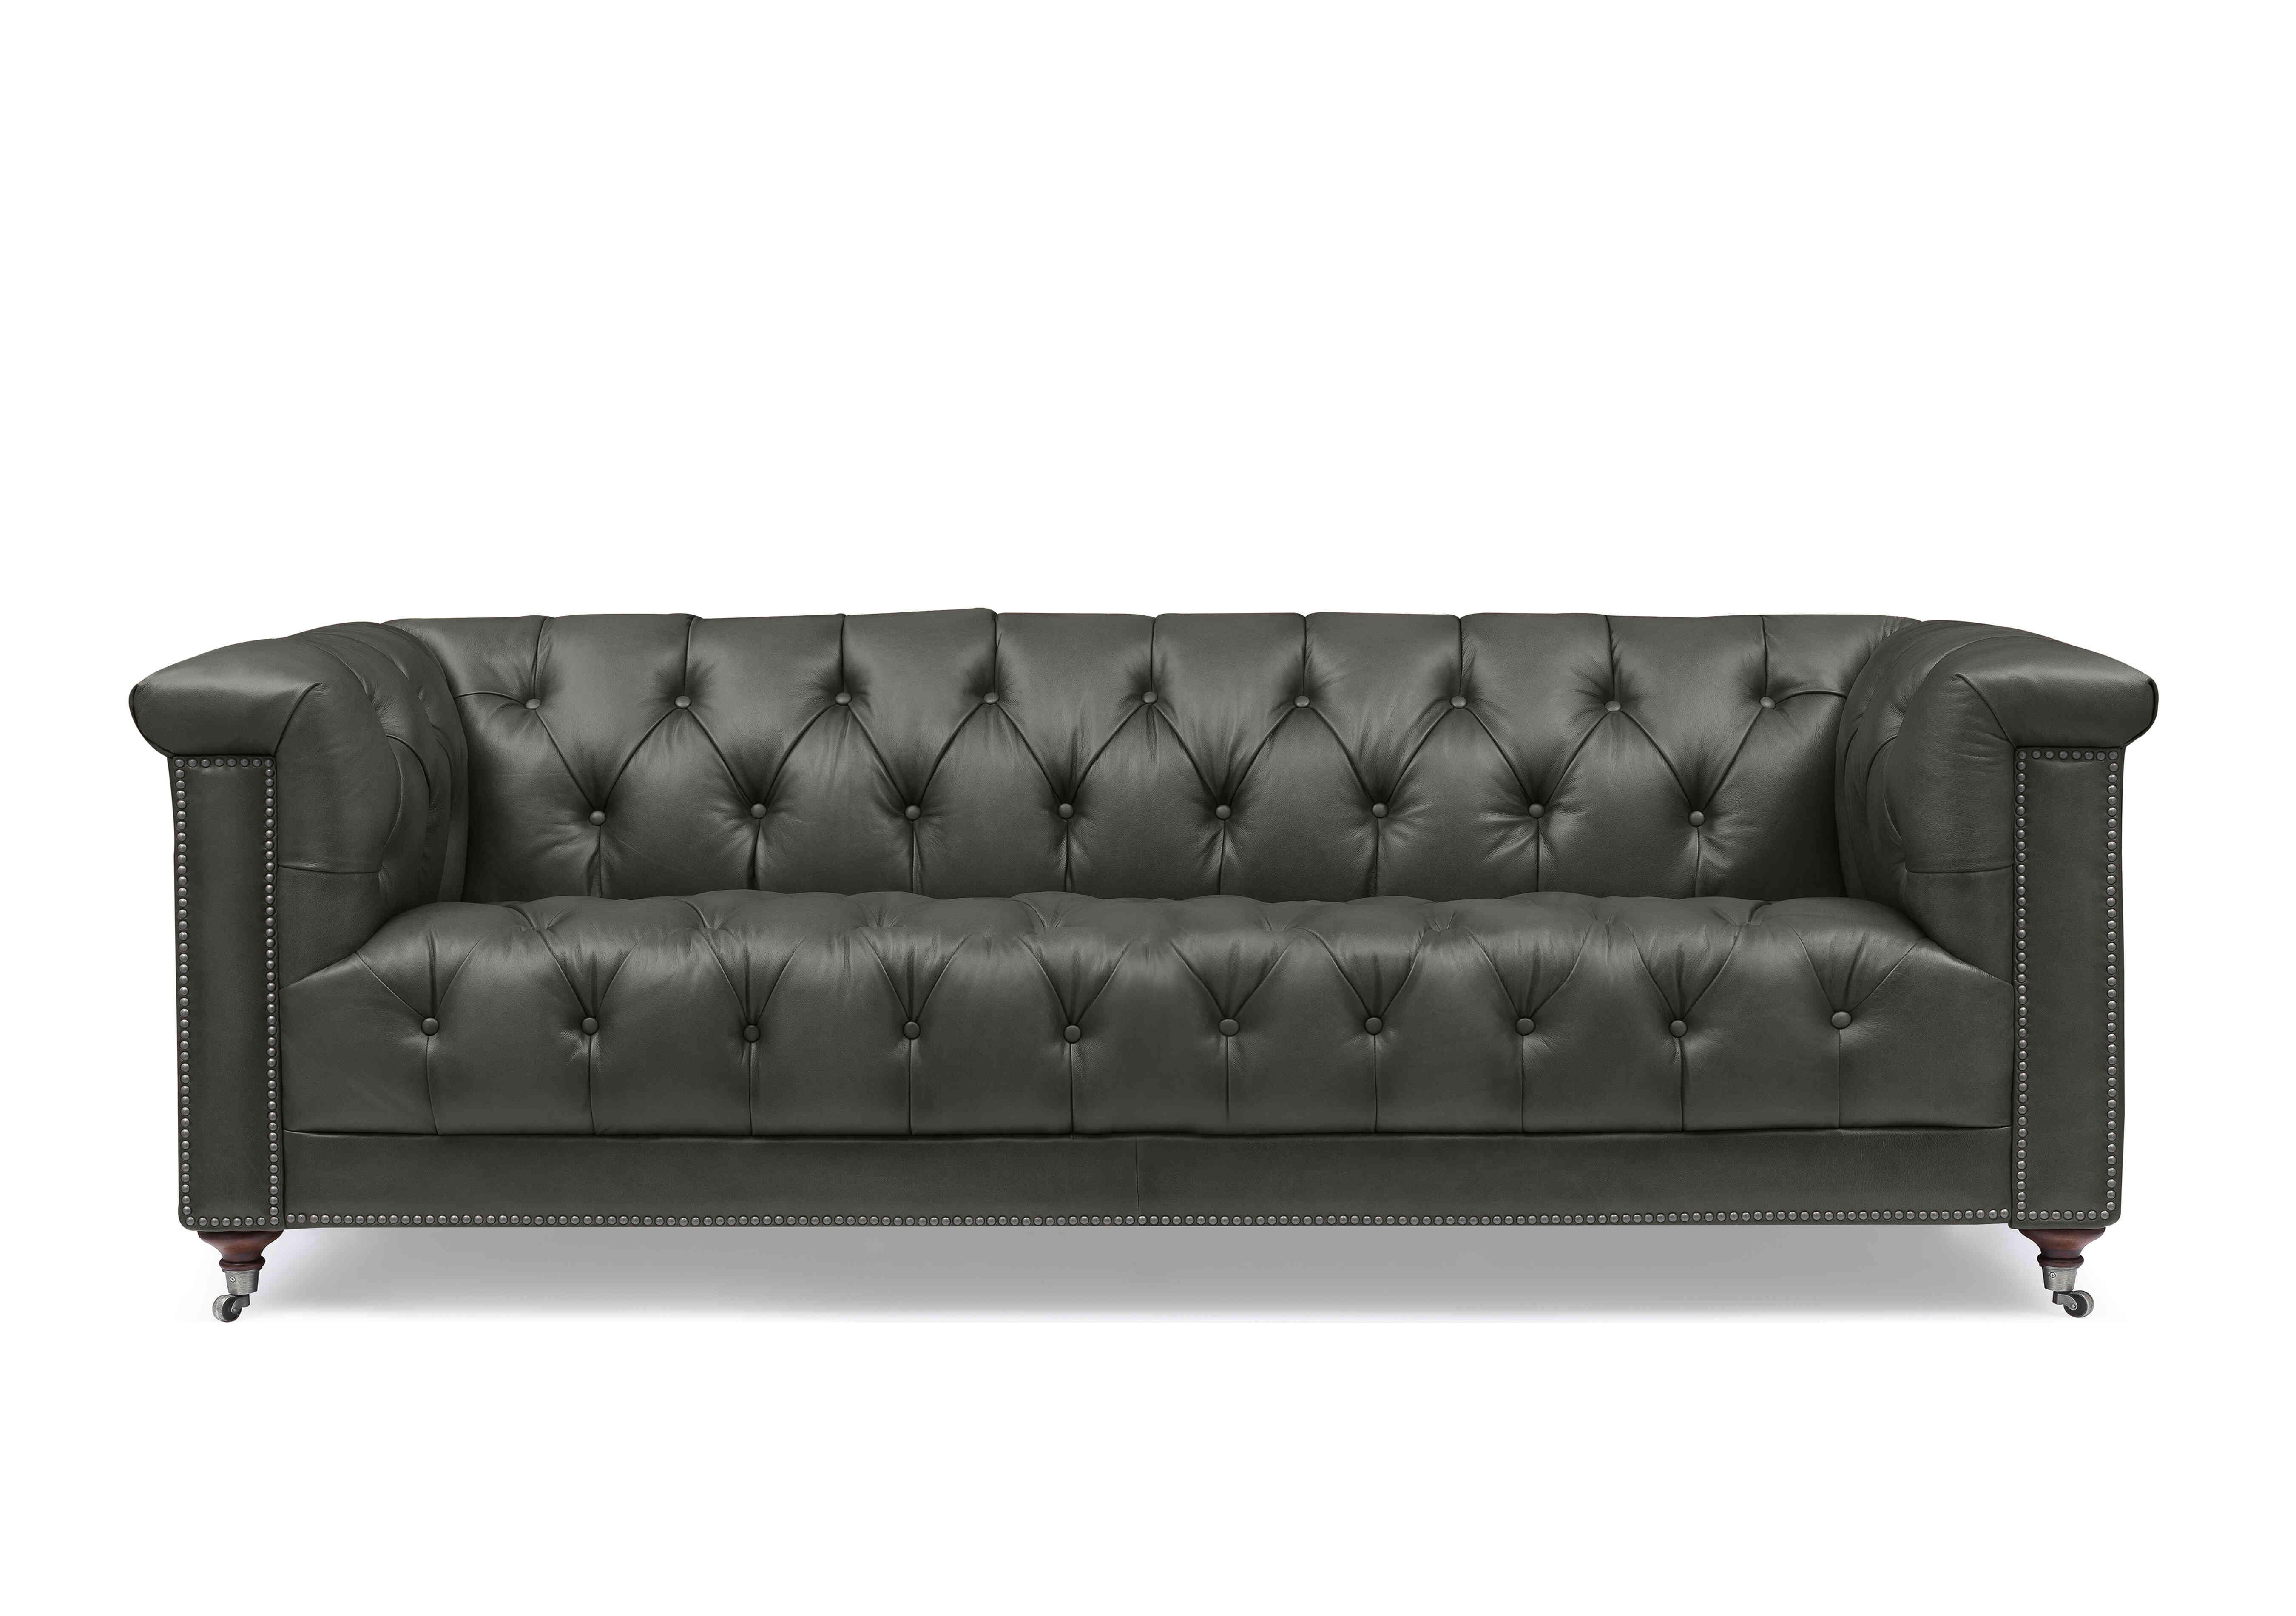 Wallace 4 Seater Leather Chesterfield Sofa with USB-C in X3y2-1966ls Granite on Furniture Village